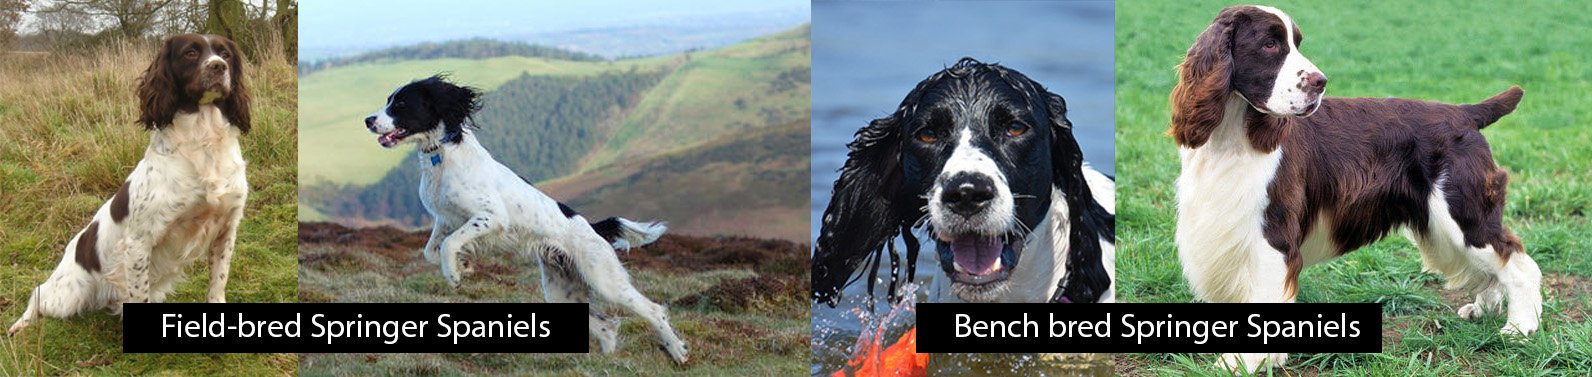 Difference between Field and Bench bred Springer Spaniels